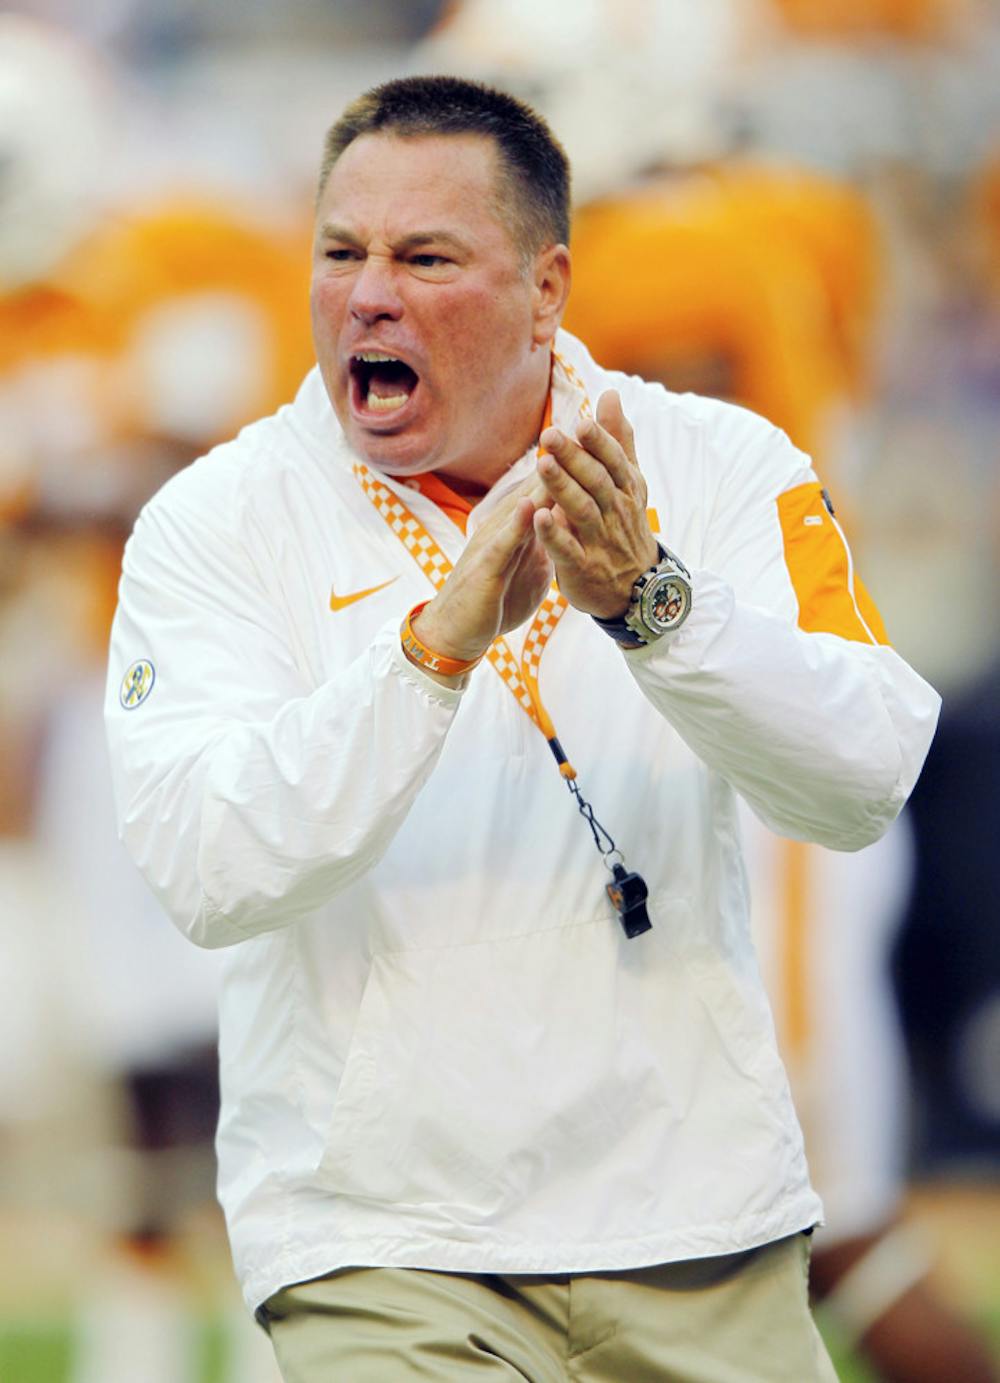 <p>Tennessee head coach Butch Jones yells to his players during warmups before an NCAA college football game against Western Carolina, Saturday, Sept. 19, 2015, in Knoxville, Tenn.</p>